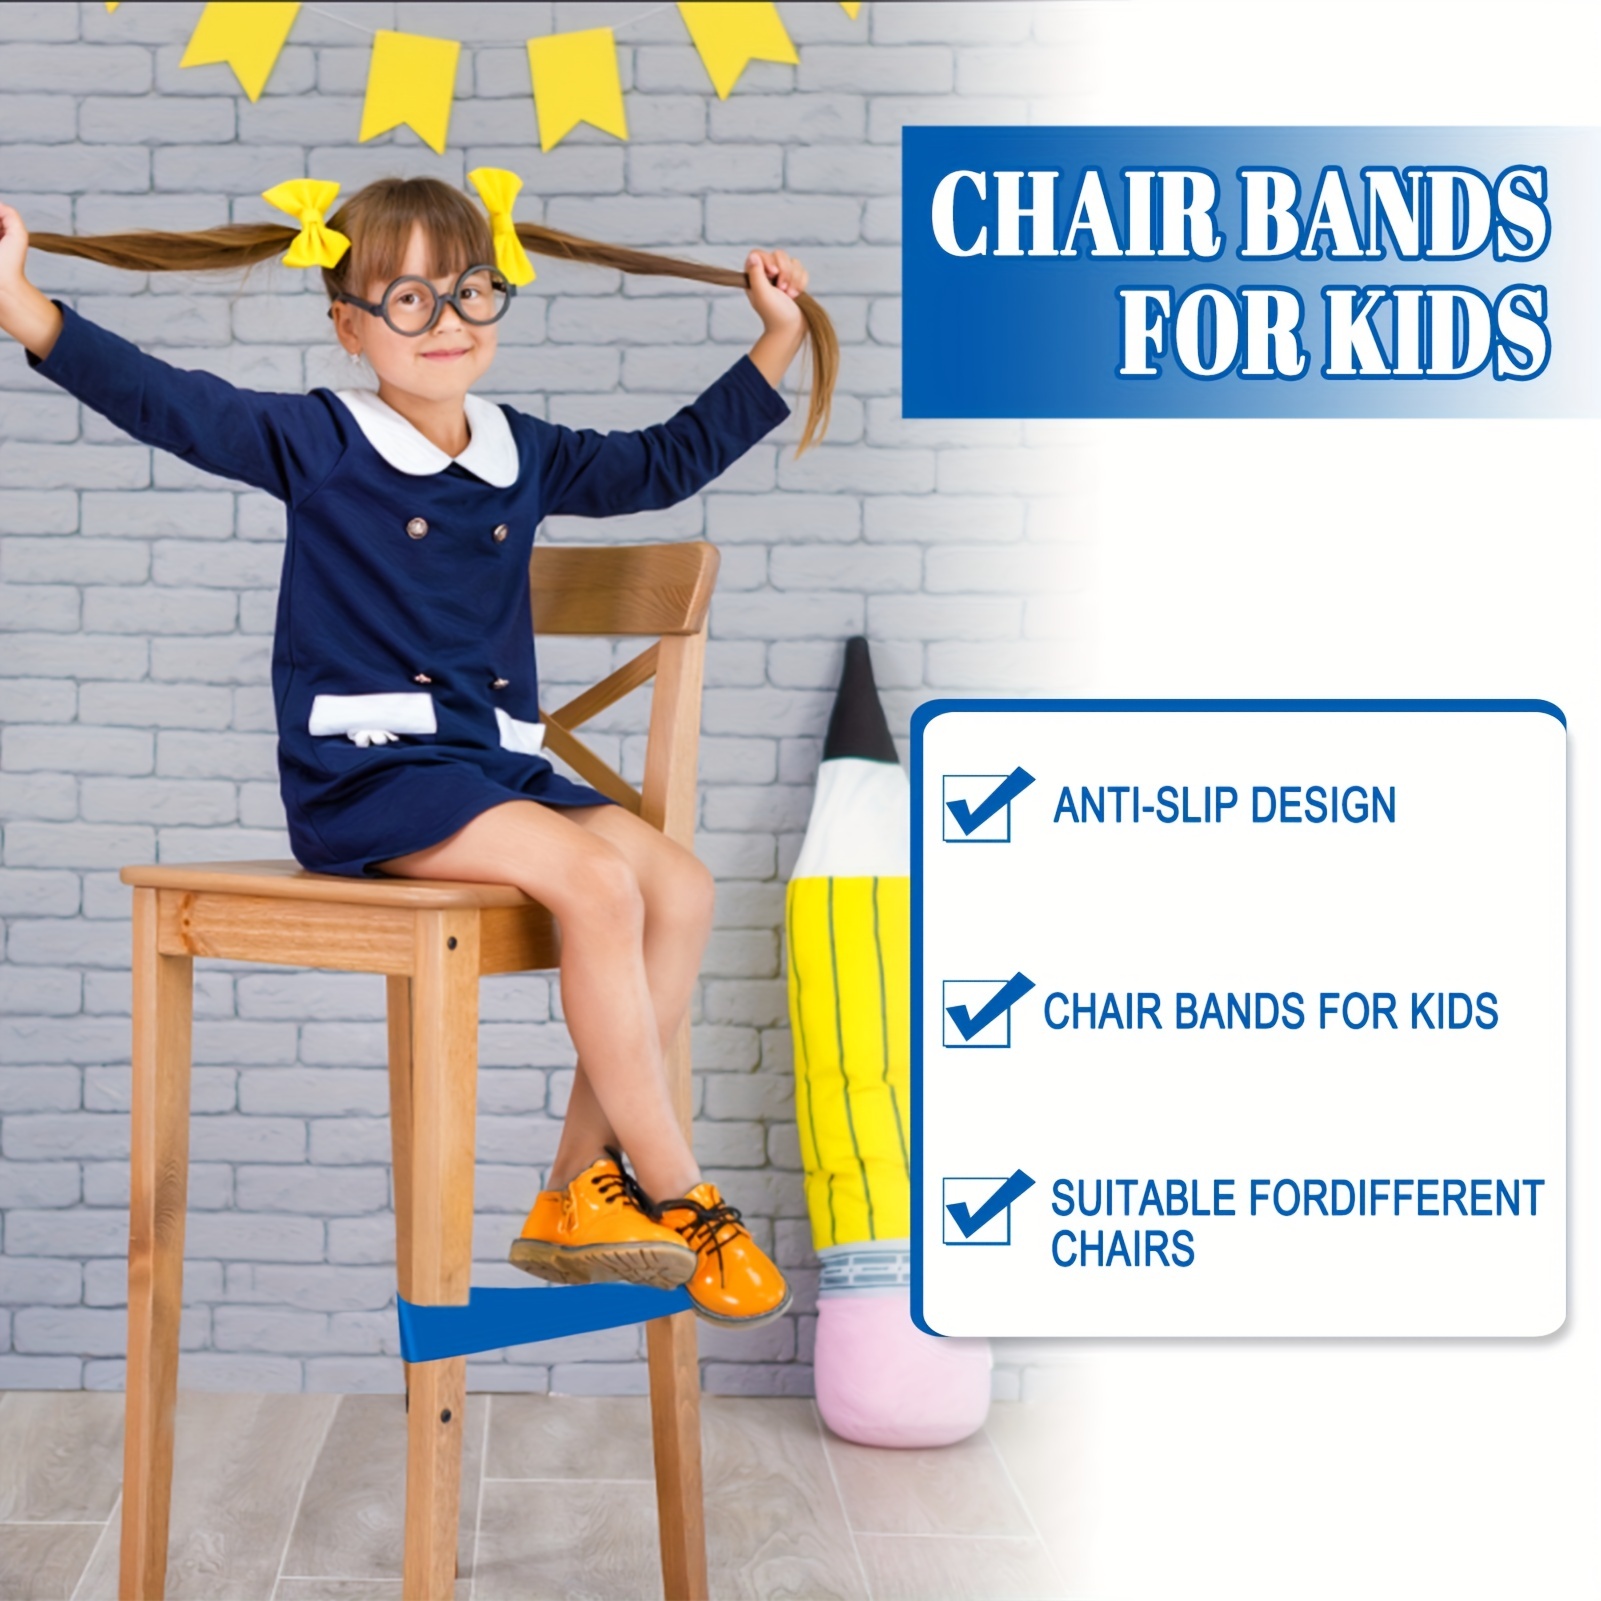 Chair Bands For Students With Fidgety Feet - Fidget Chair Bands